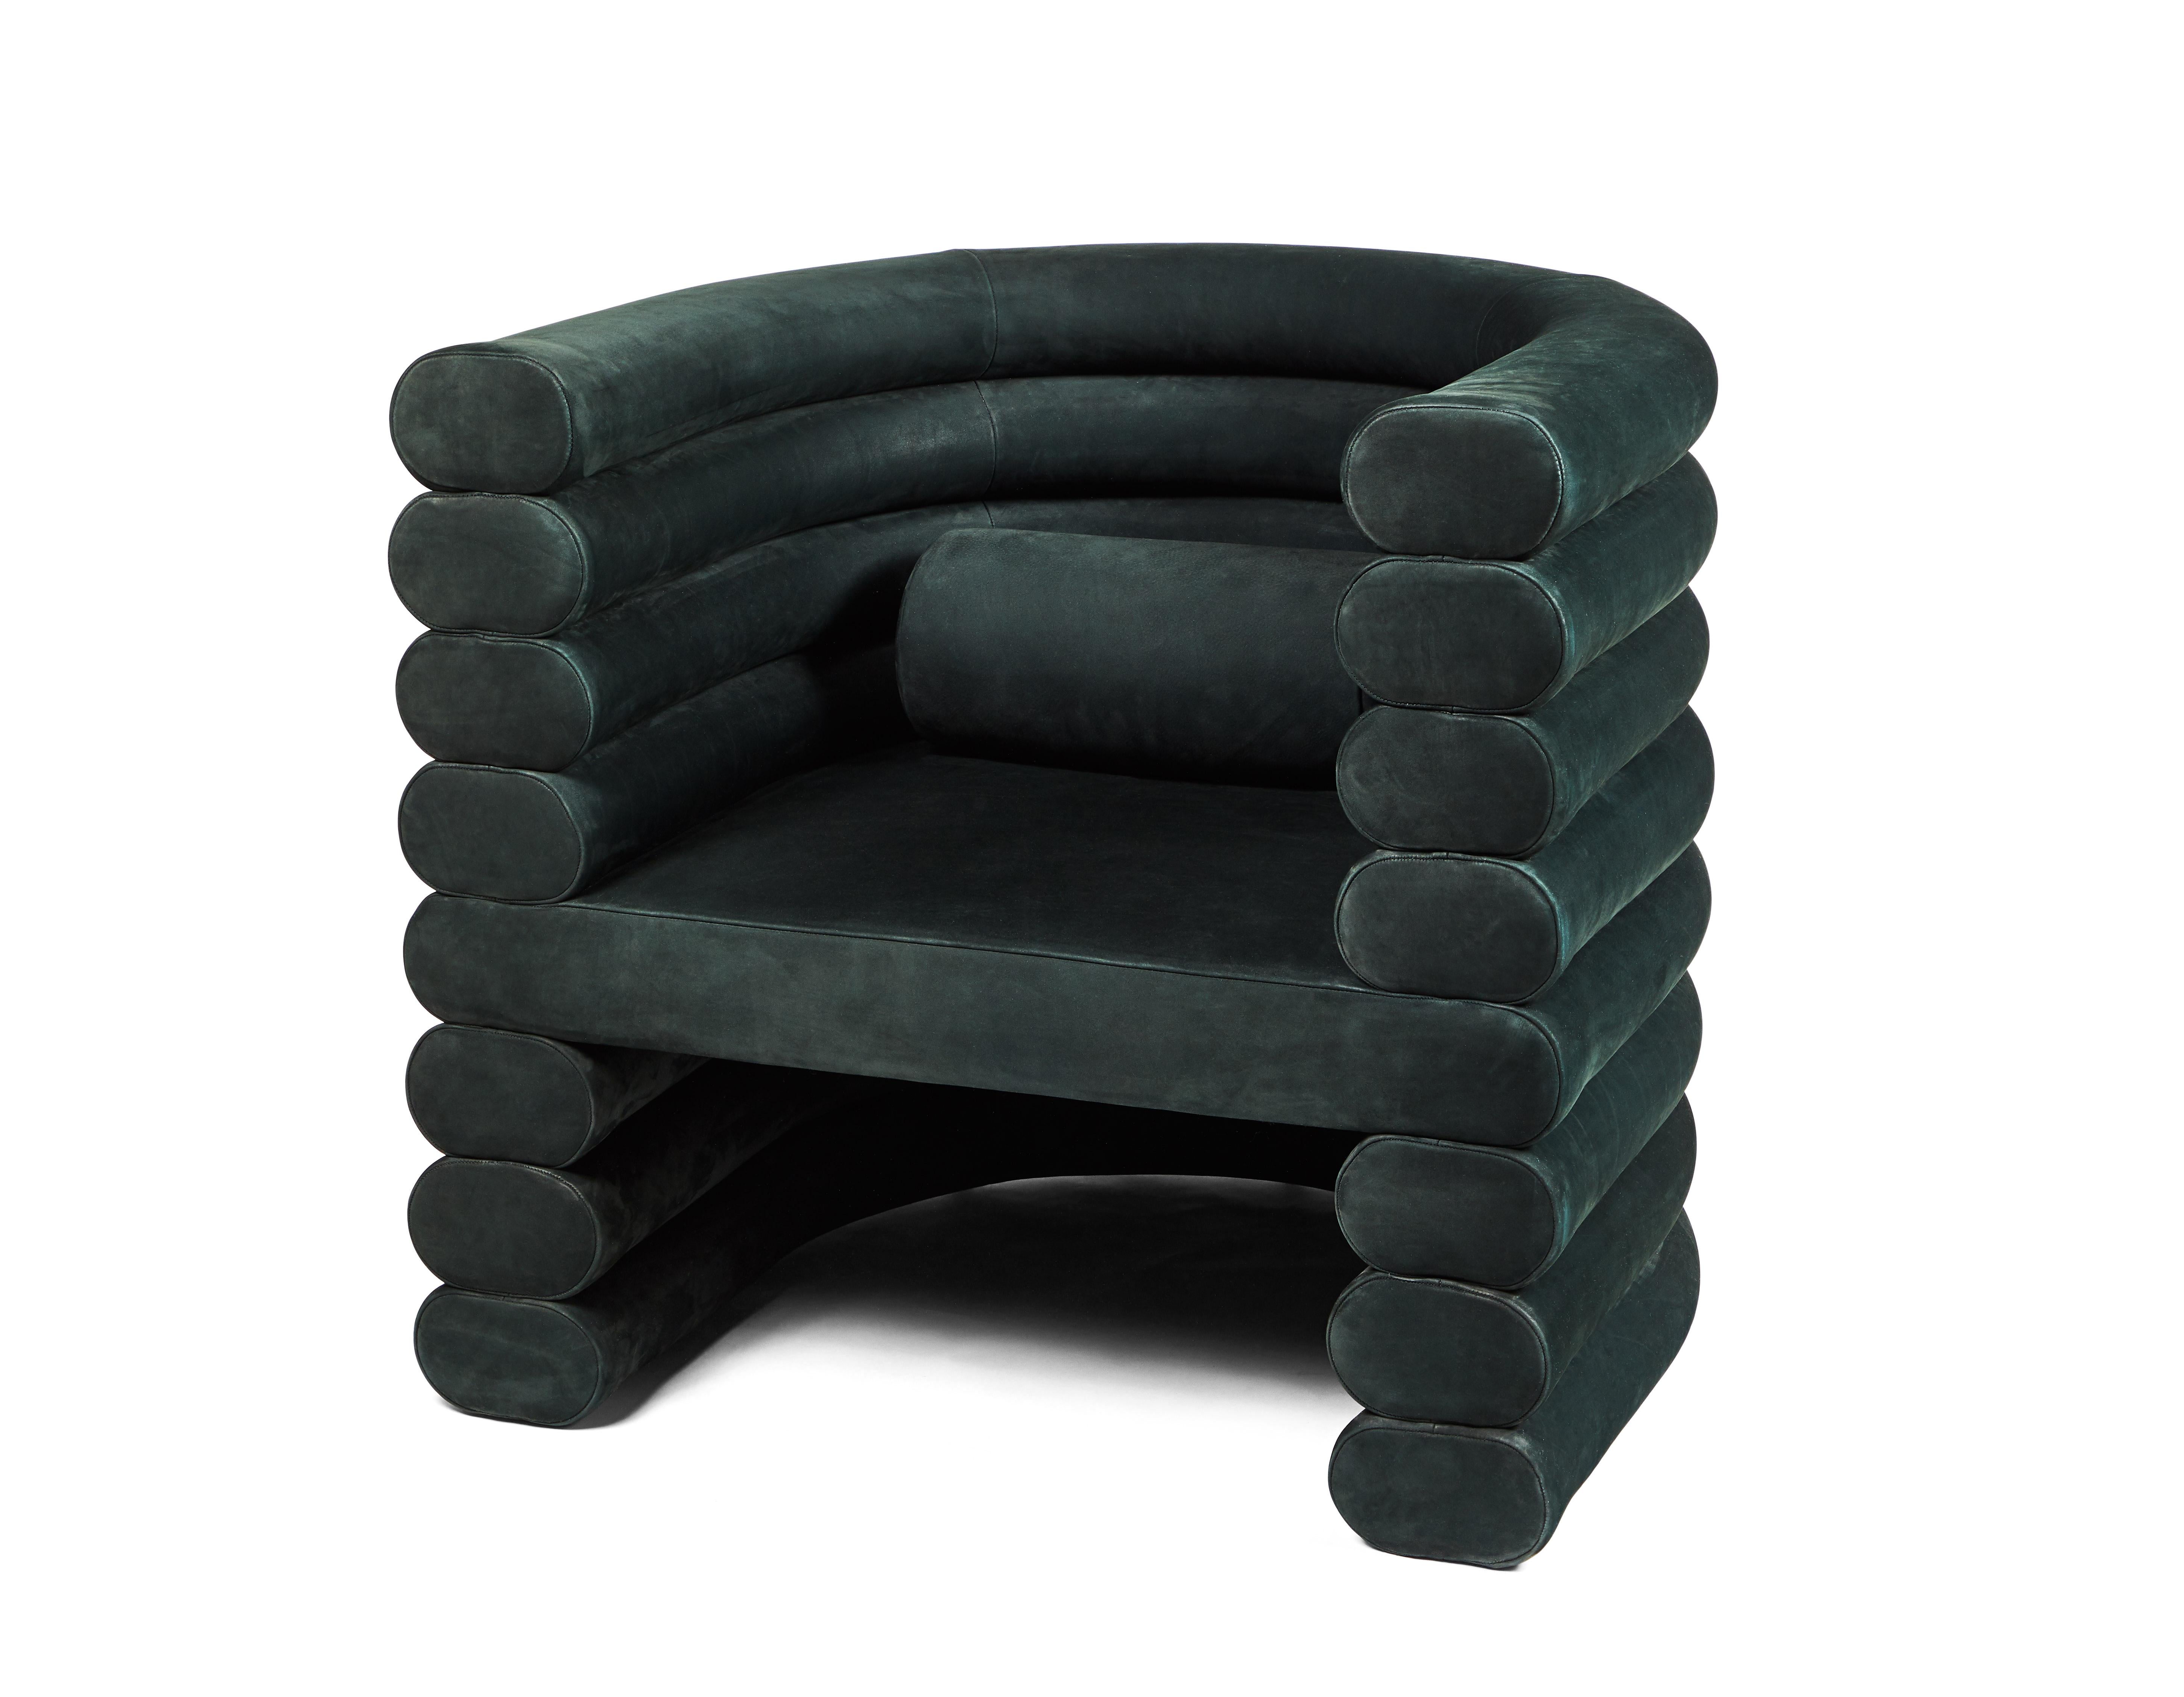 The Rhea chair is shown in Jade upholstery. This is considered a sculptural upholstered club chair. Each section/tube is hand carved at a small shop in Los Angeles and then masterly upholstered. Each chair also come with a tube bolster for lower